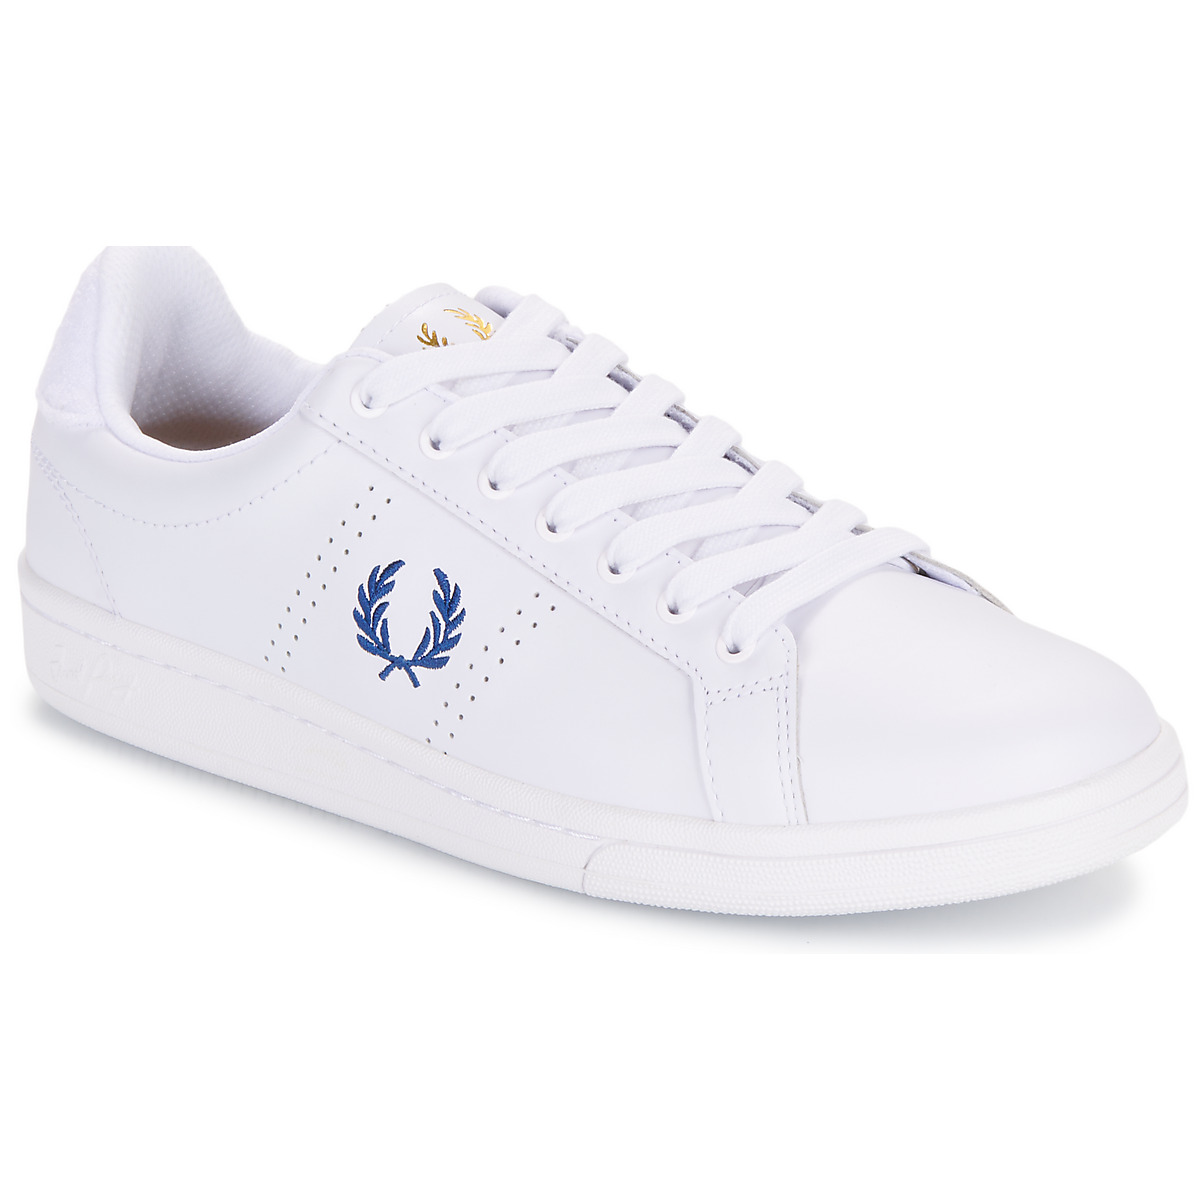 Fred Perry  B721 Leather / Towelling  Bílá